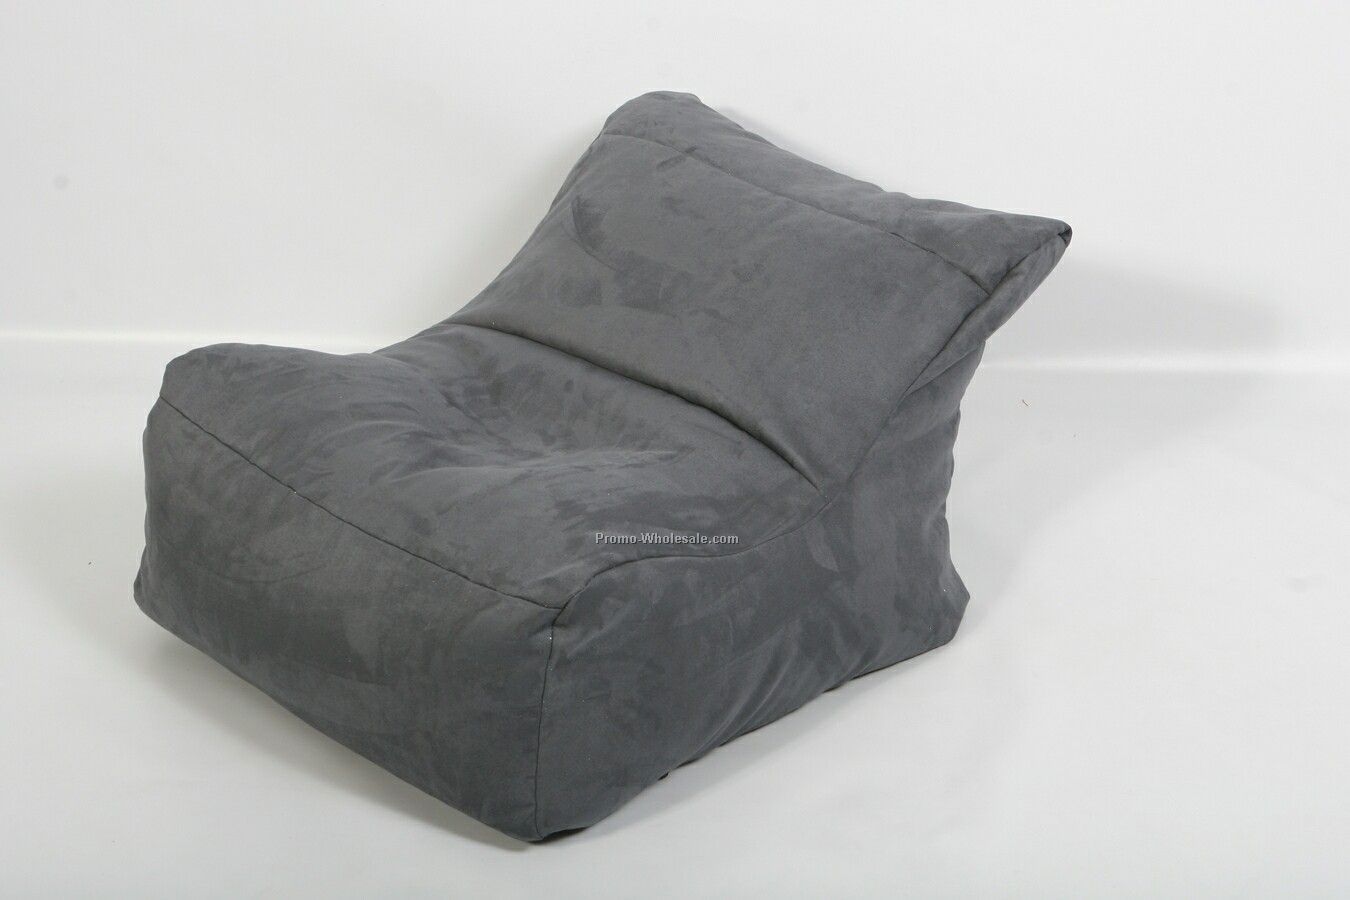 25"x25"x25" Suede Integra Eco Chair